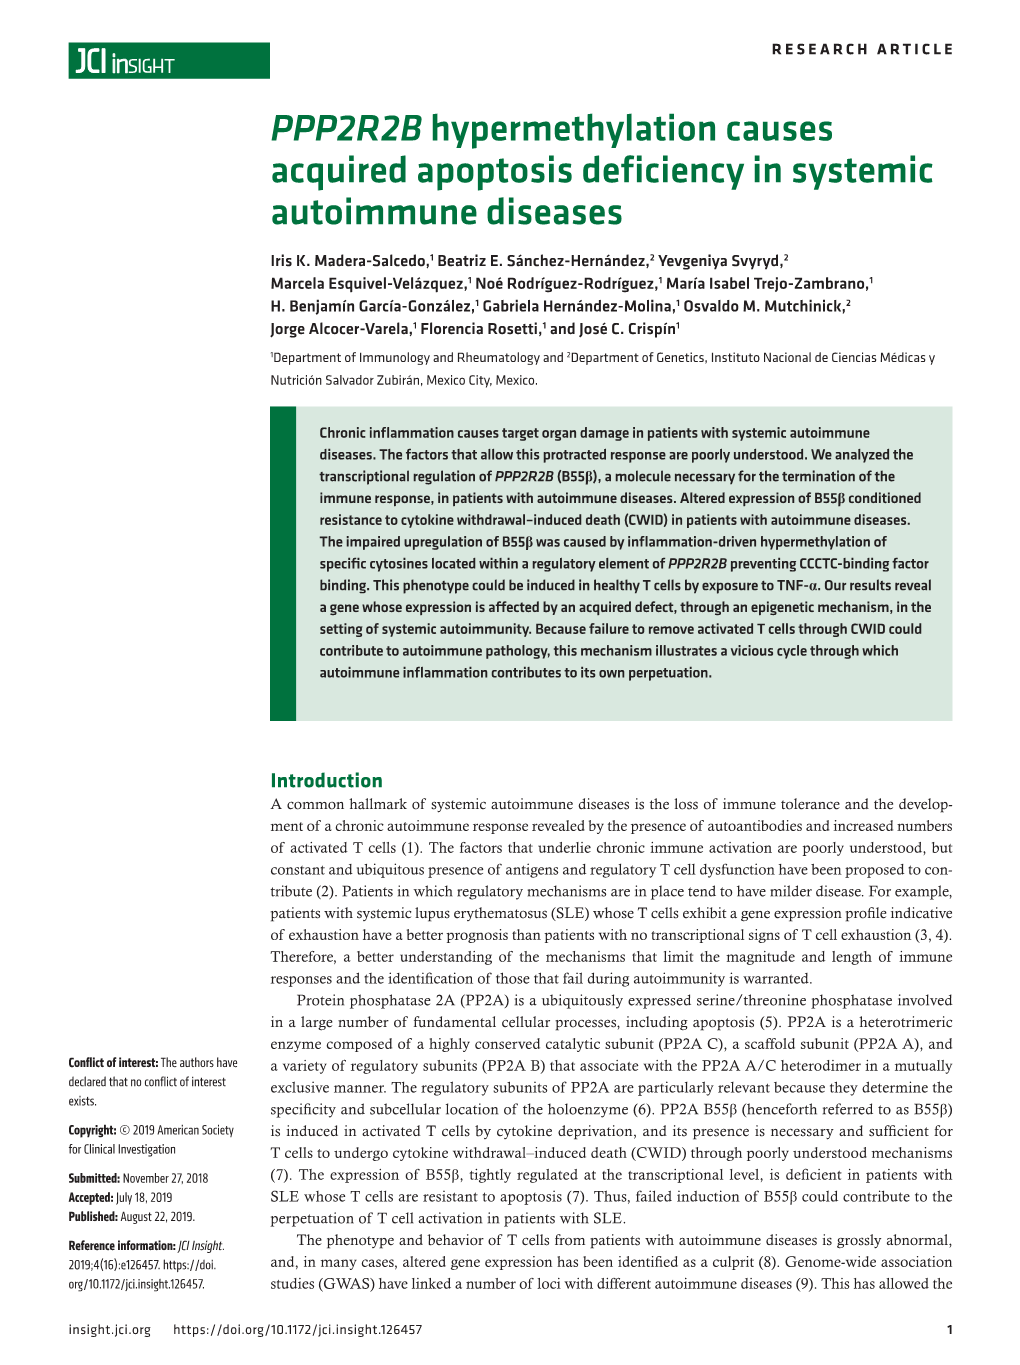 PPP2R2B Hypermethylation Causes Acquired Apoptosis Deficiency in Systemic Autoimmune Diseases